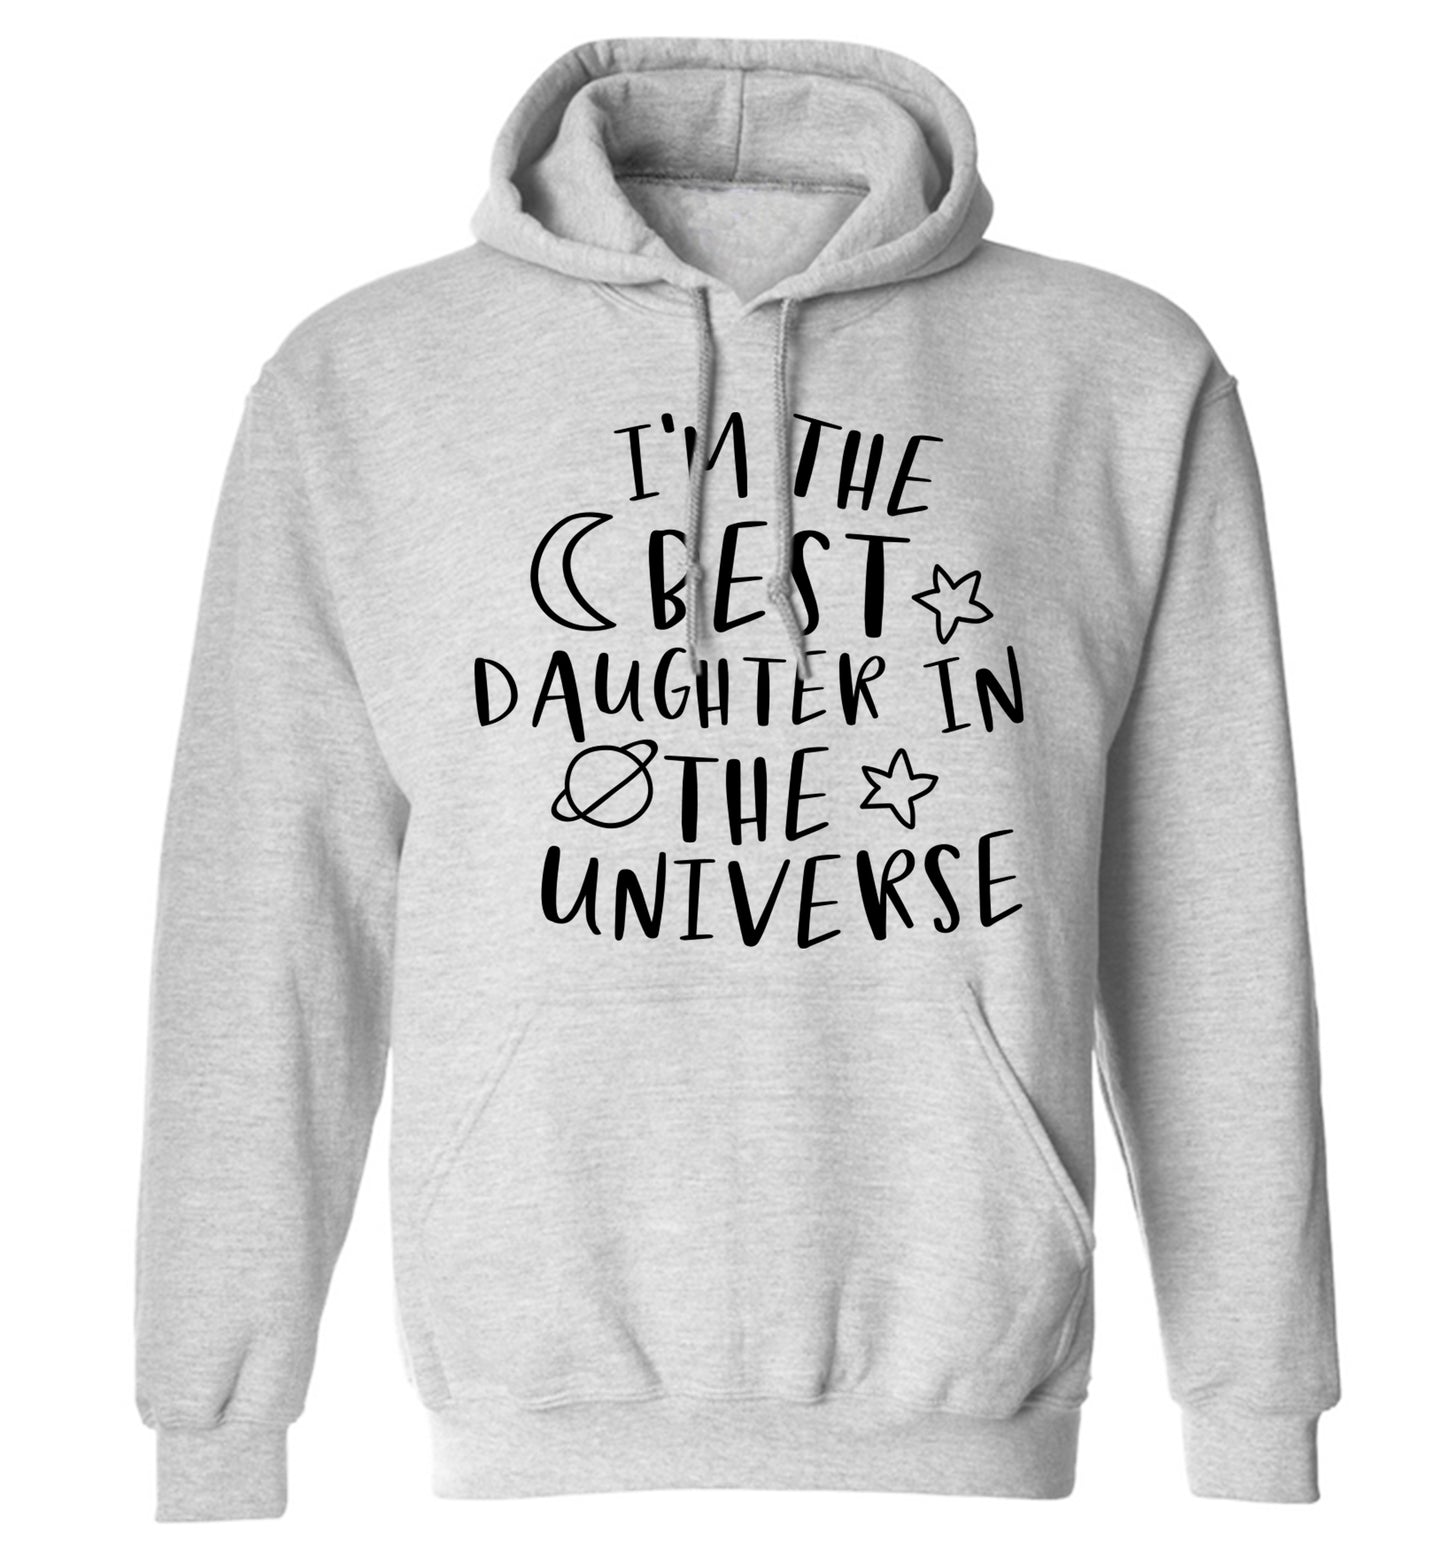 I'm the best daughter in the universe adults unisex grey hoodie 2XL